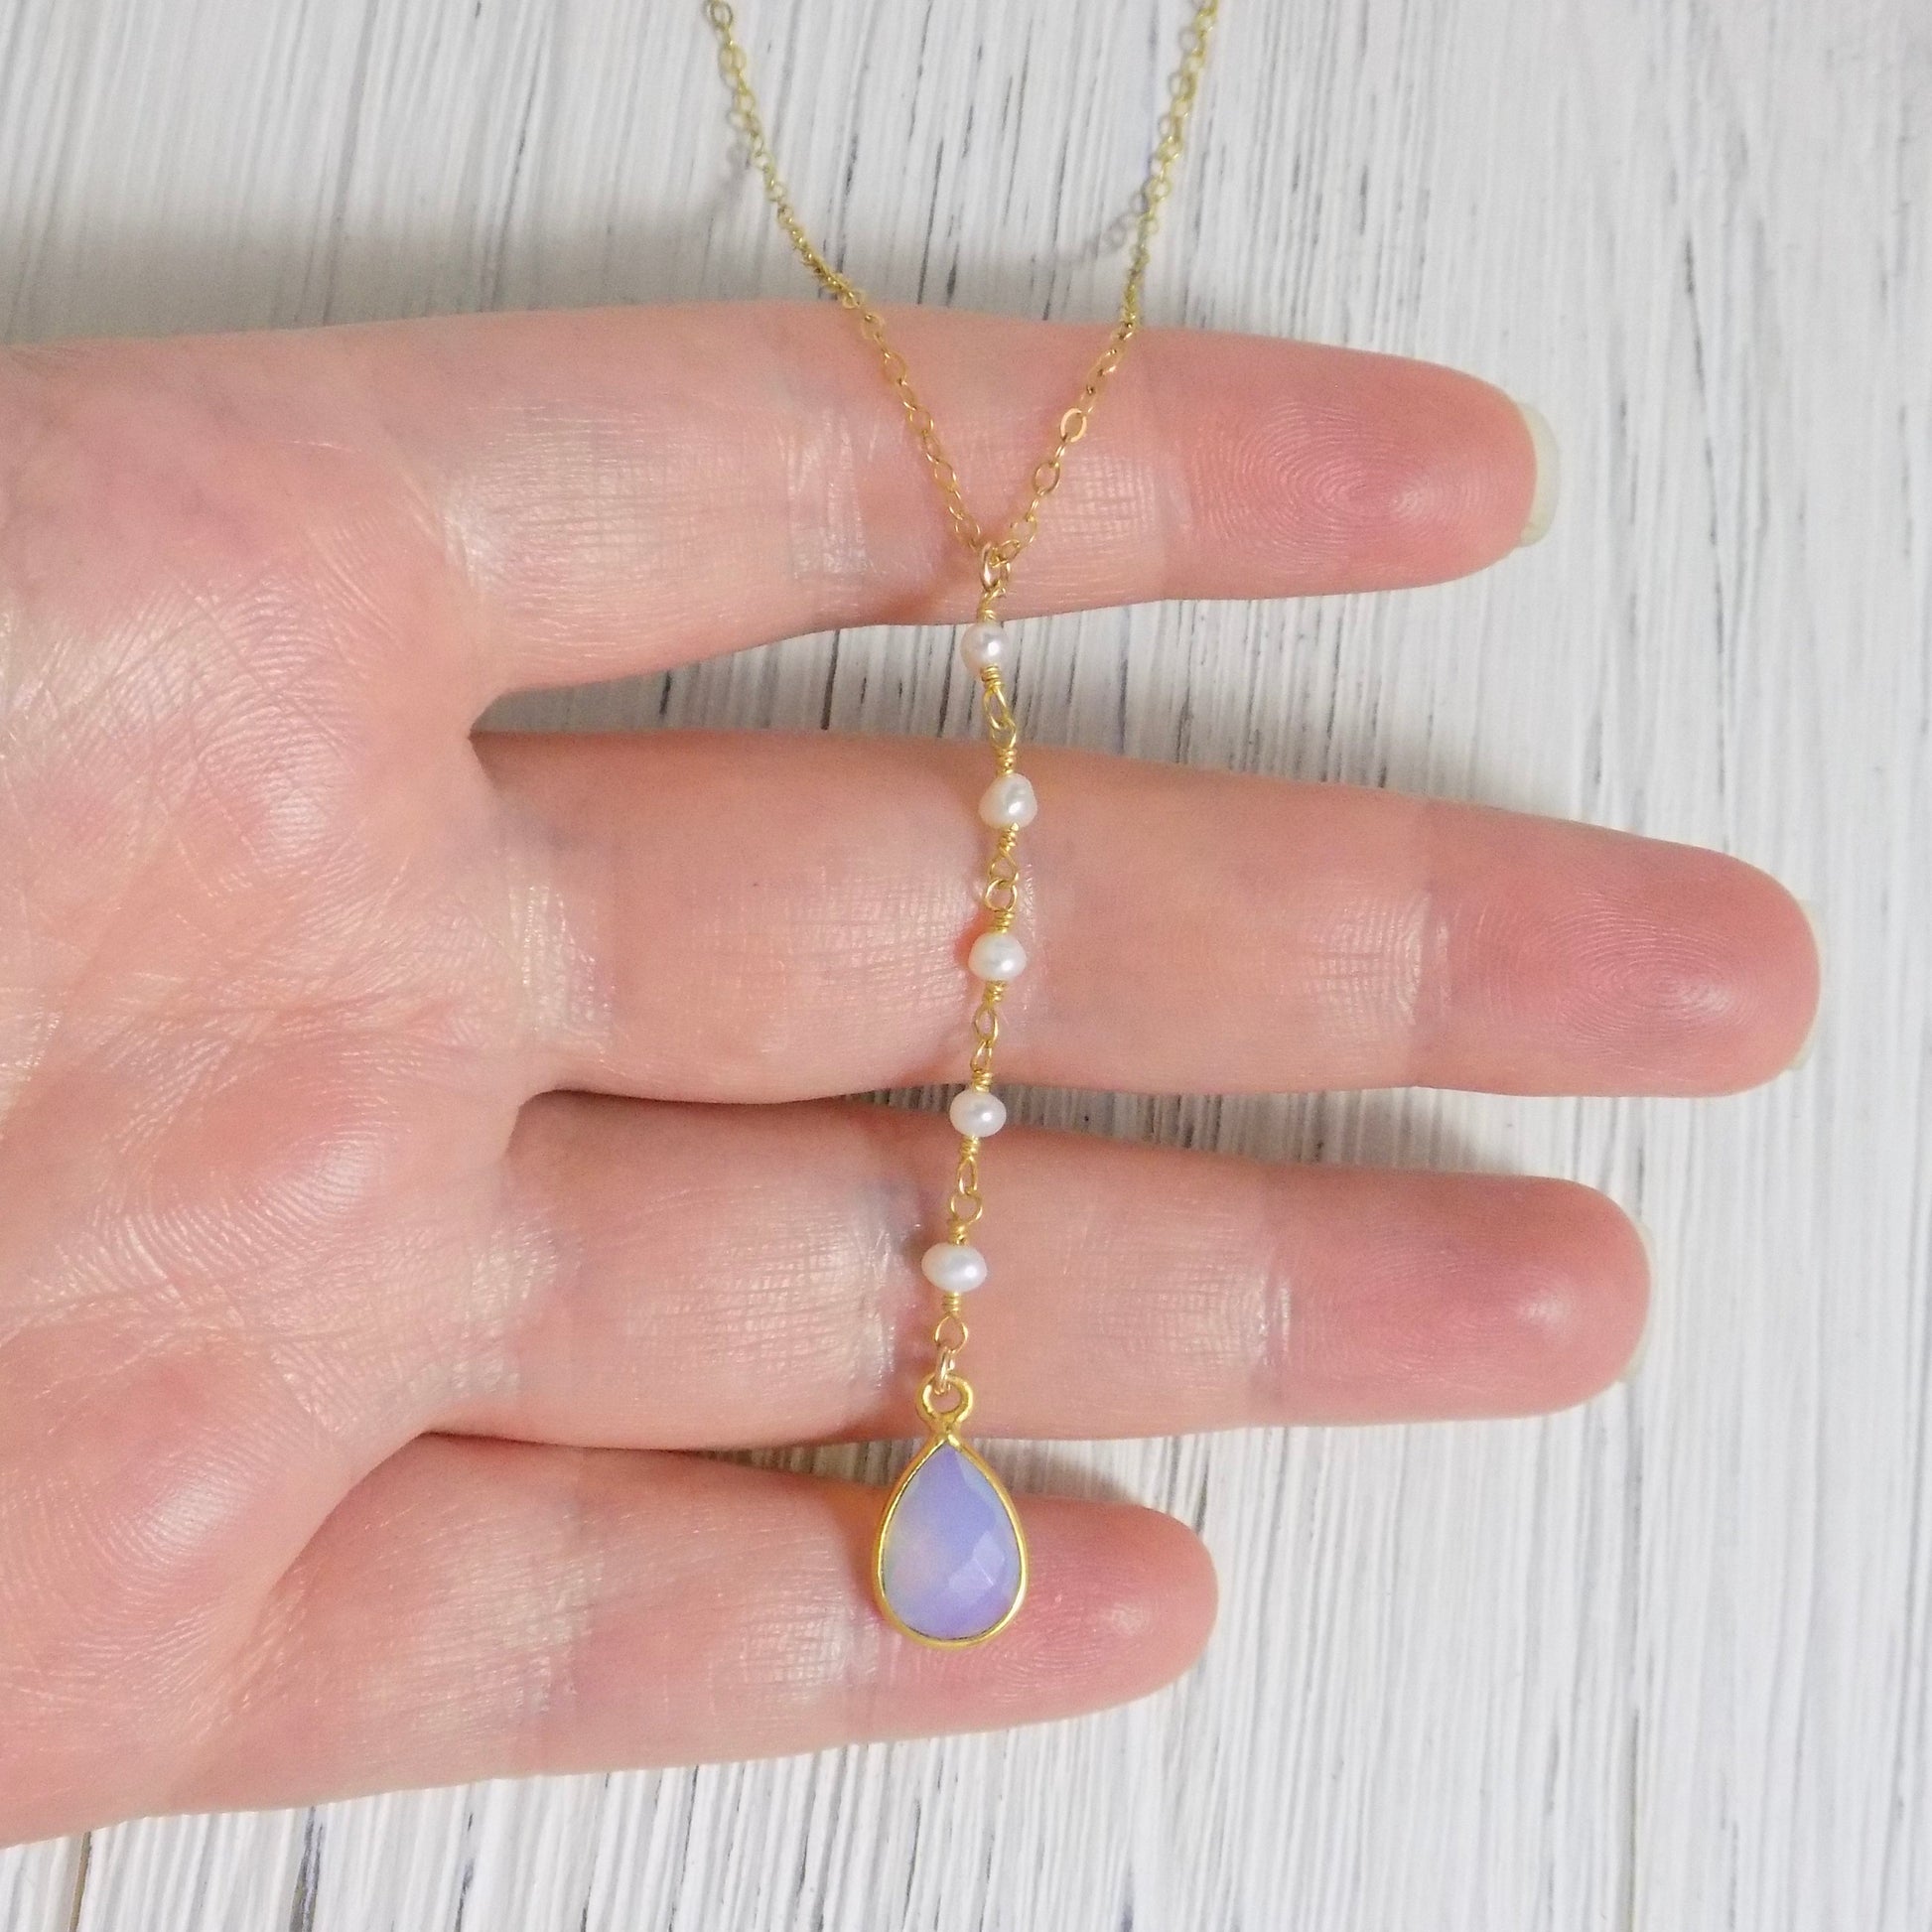 Freshwater Pearl Y Necklace Gold, Opal Lariat Necklace Gold, Opalite October Birthstone, Gifts For Wife, M4-107